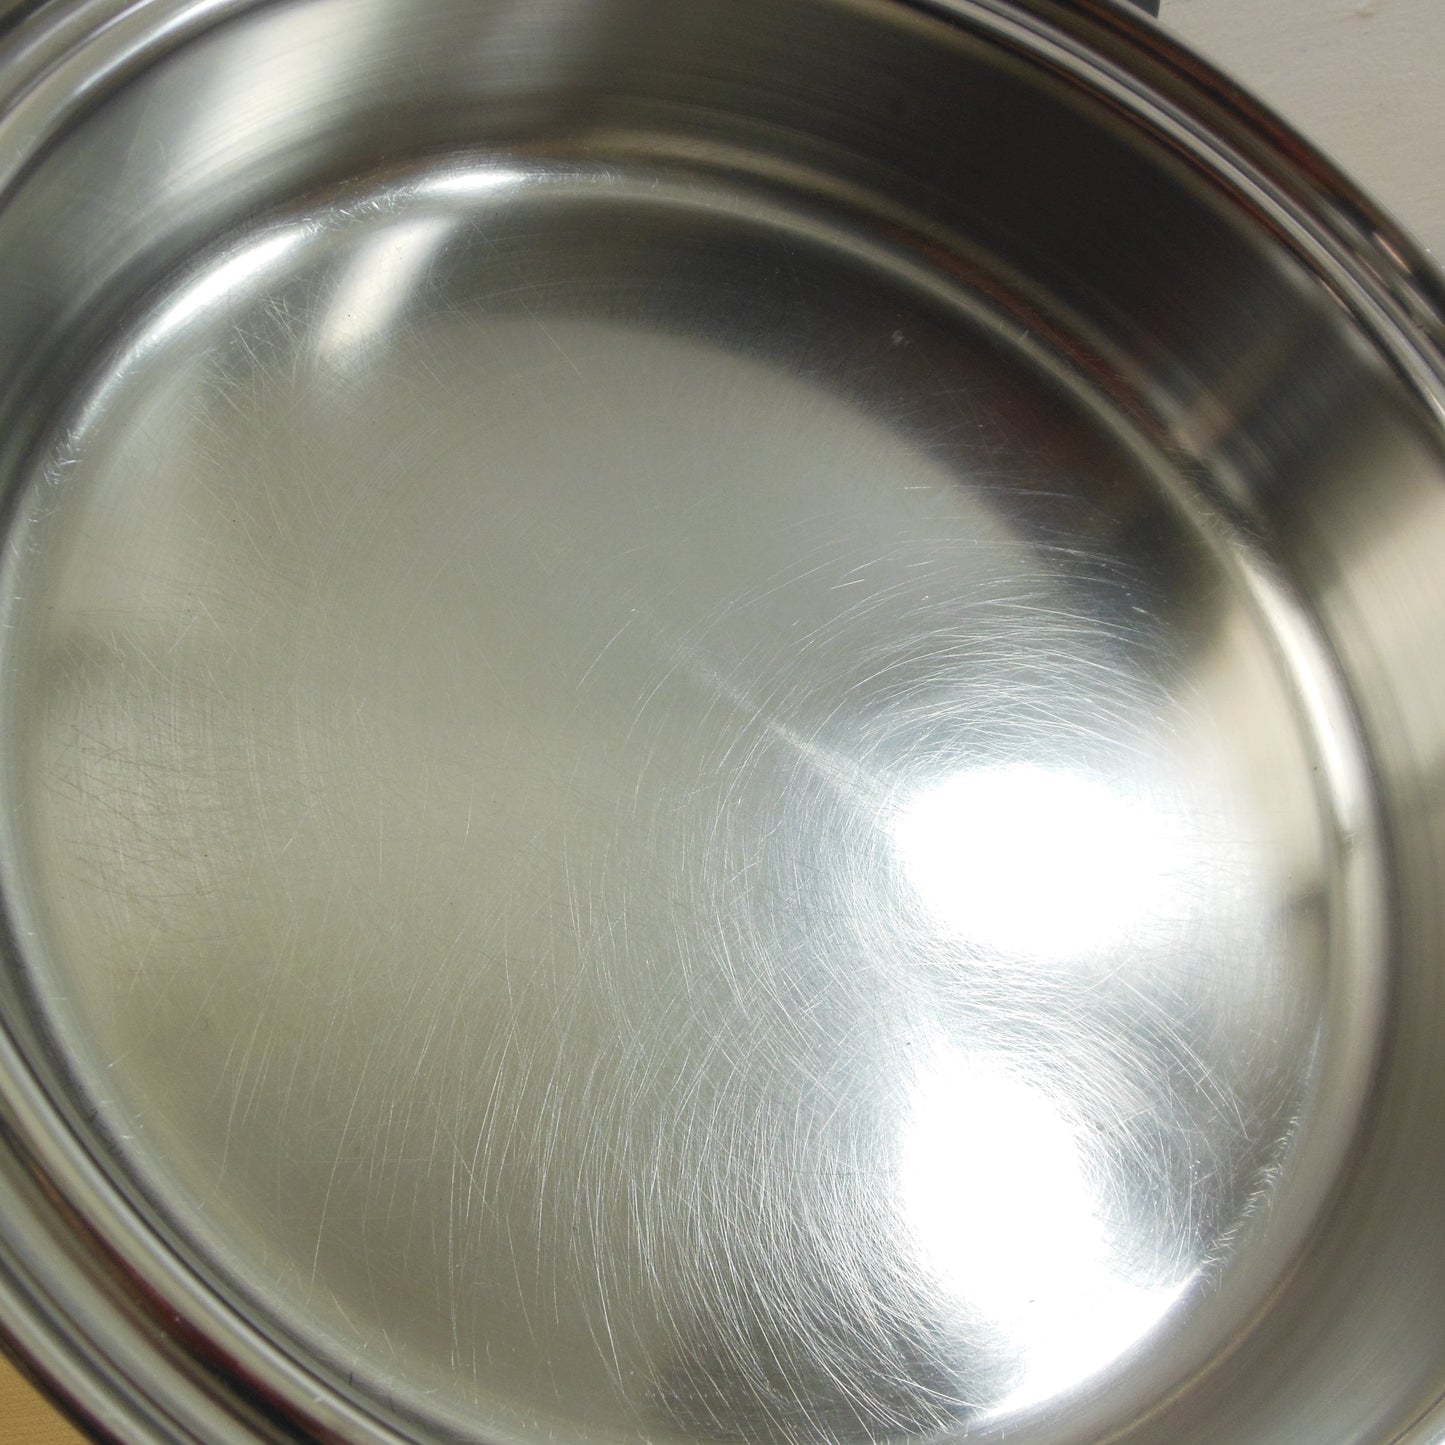 Cutco USA 5 Ply Stainless 11.5" Open Fry Pan Skillet Cleaned